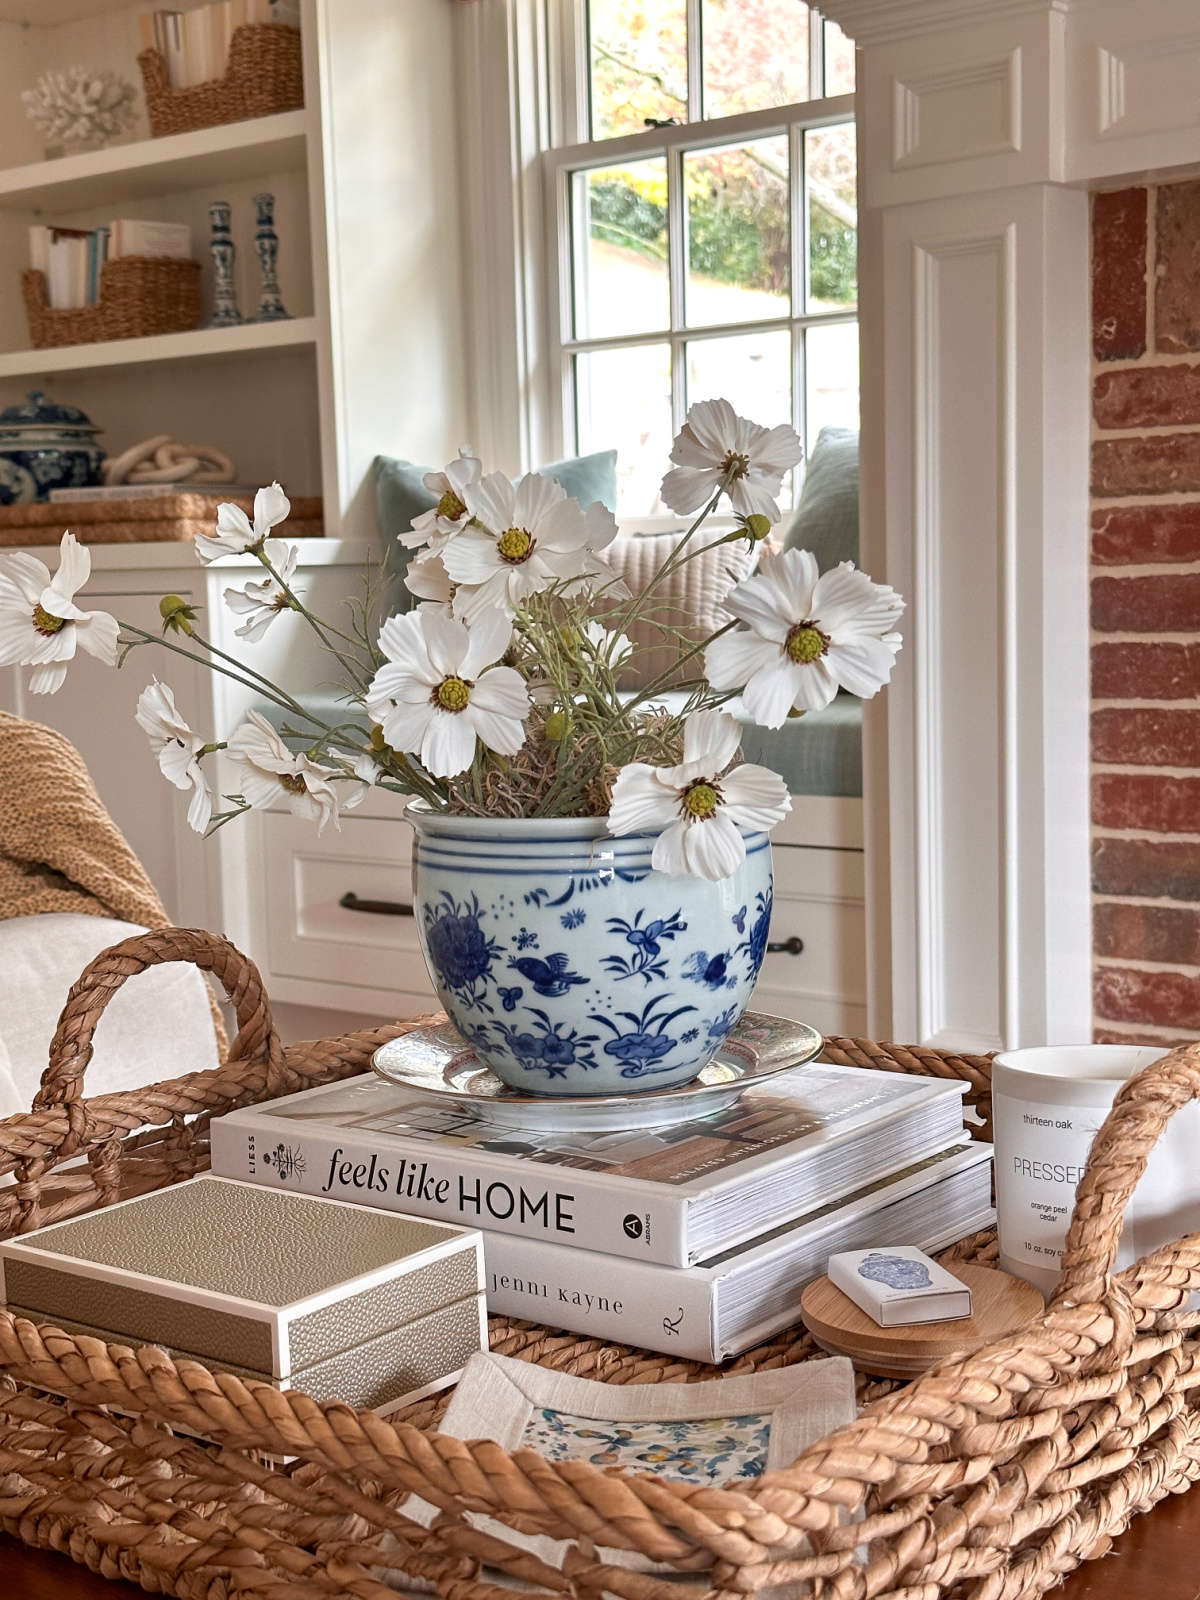 Square woven tray on coffee table filled with books, blue and white vase of white flowers, a rectangular box, candle and cocktail napkins.